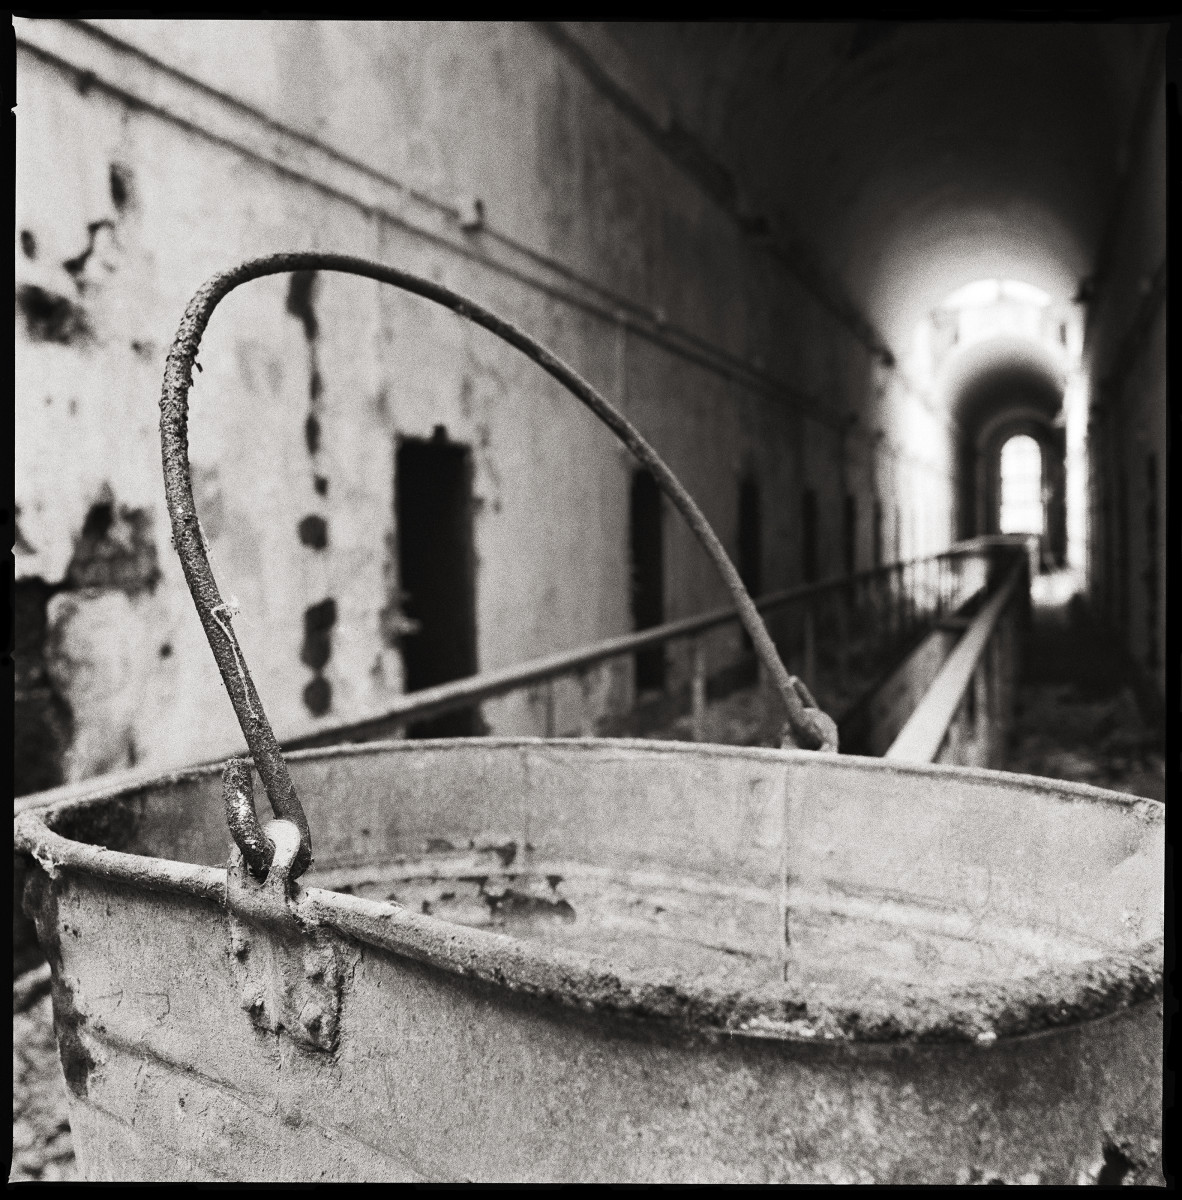 Bucket, Cellblock #6 by Eric T. Kunsman  Image: ID: A black and white image shows a rusted metal bucket in the foreground. In the background, prison cells are visible but not in focus.